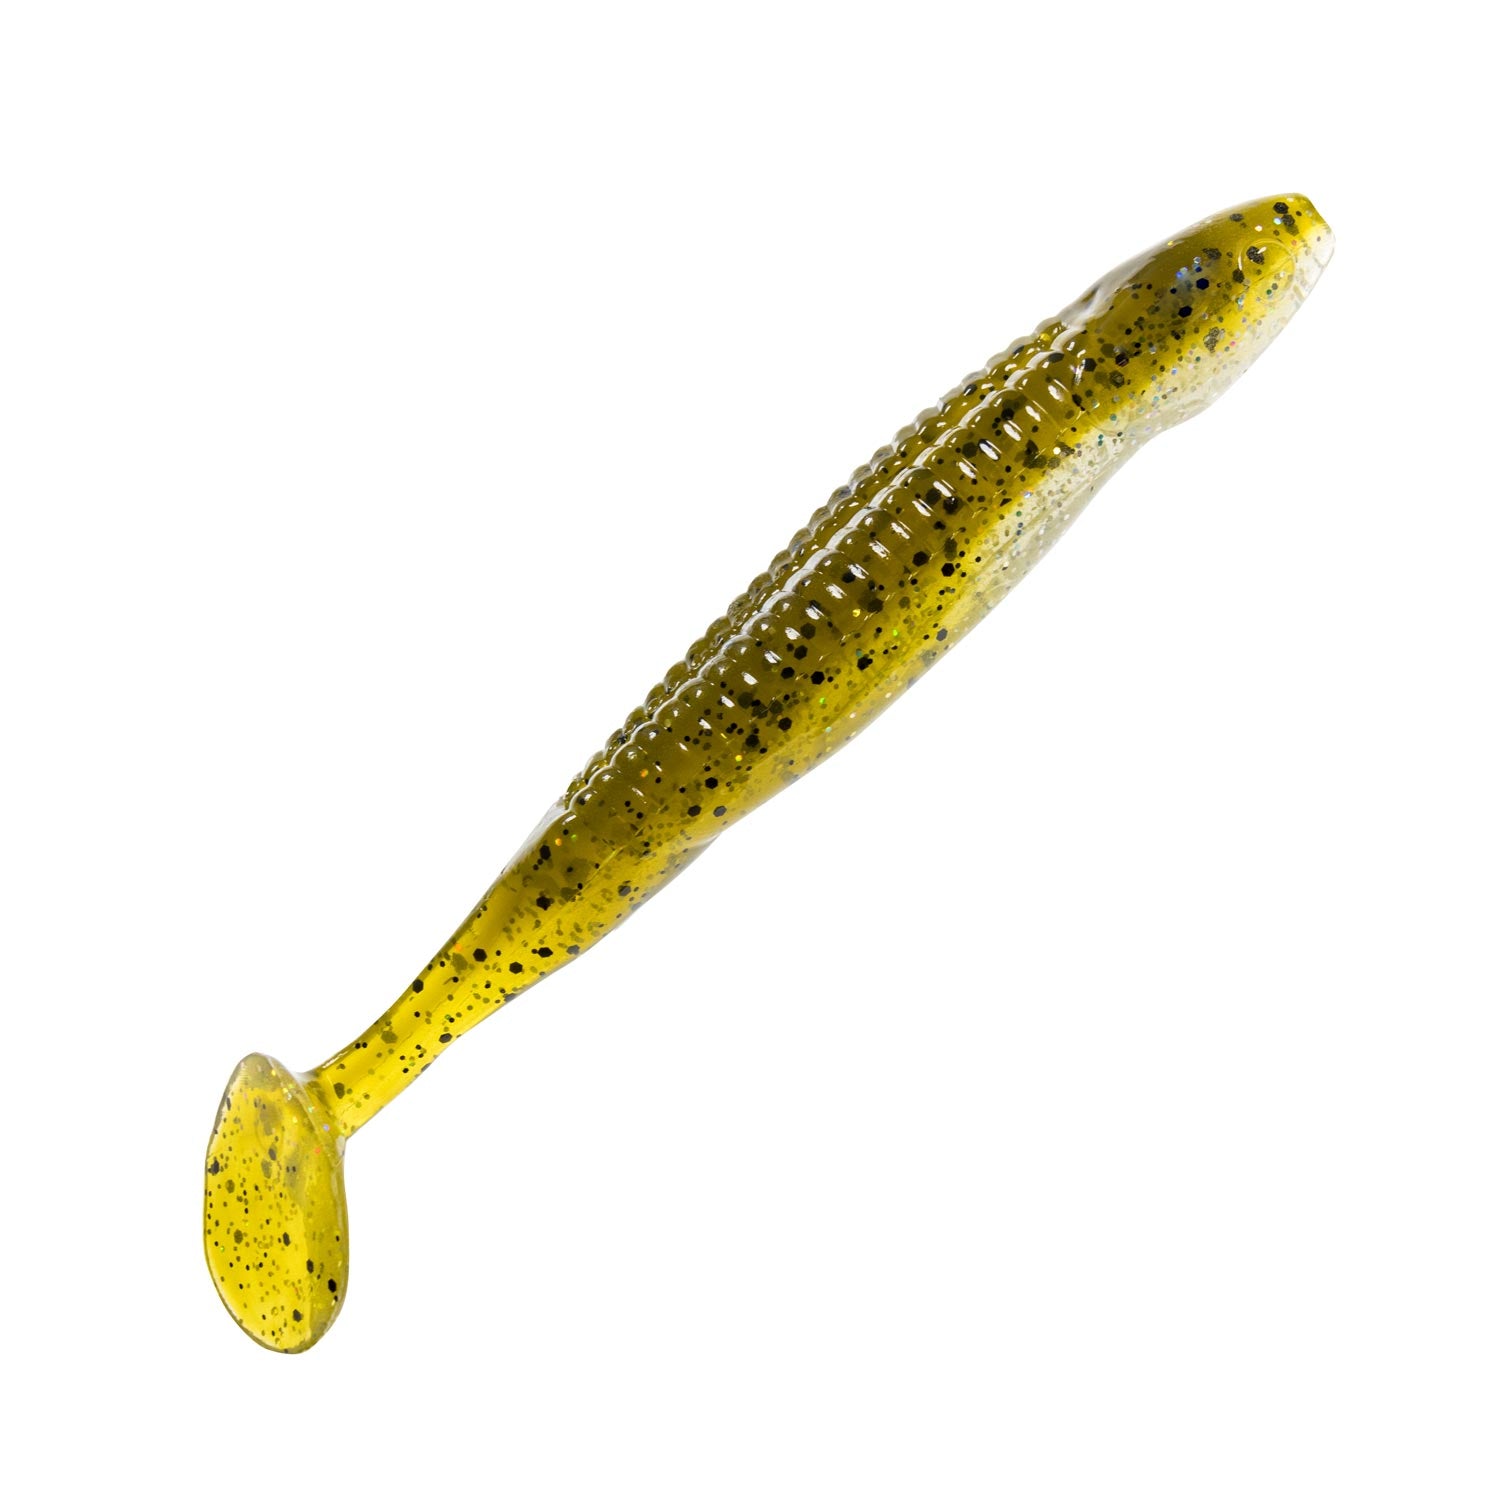 Charlies Worms Zipper Dipper Speckled Trout